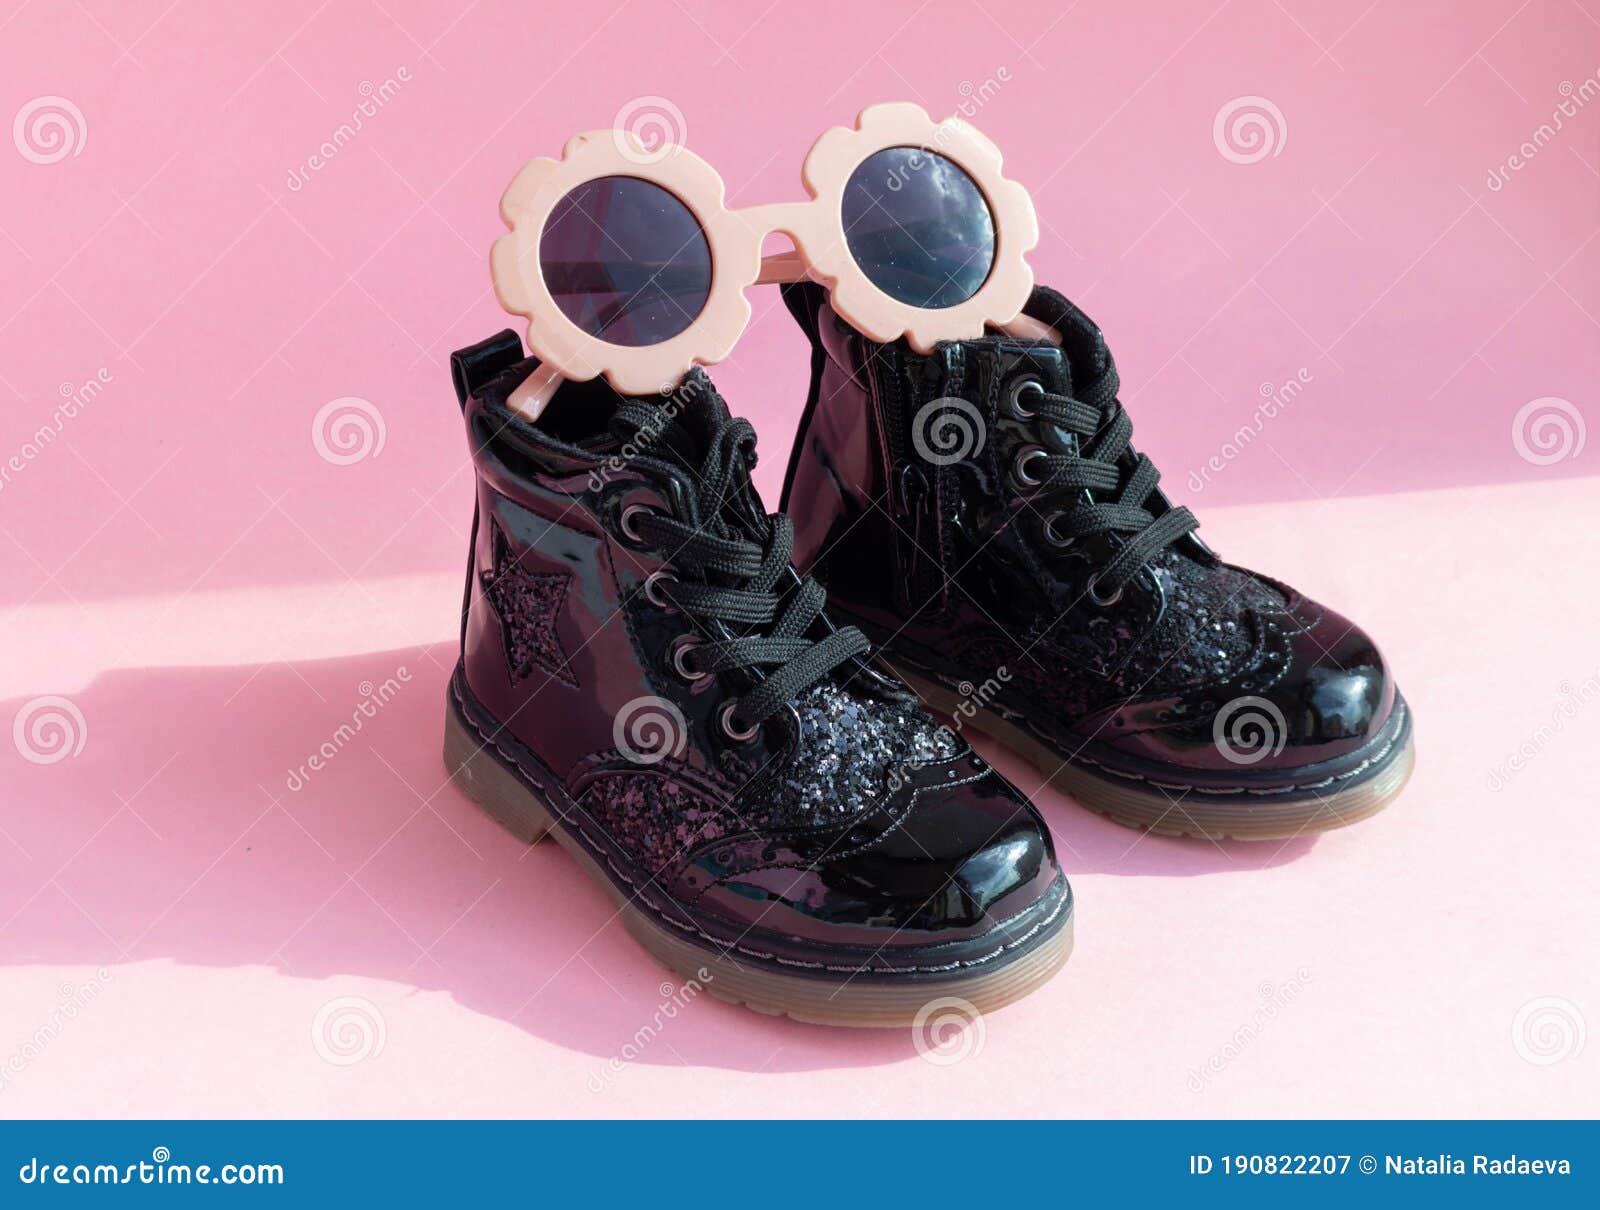 patent children`s boots shoes and accessories for little fashionistas on a pink background